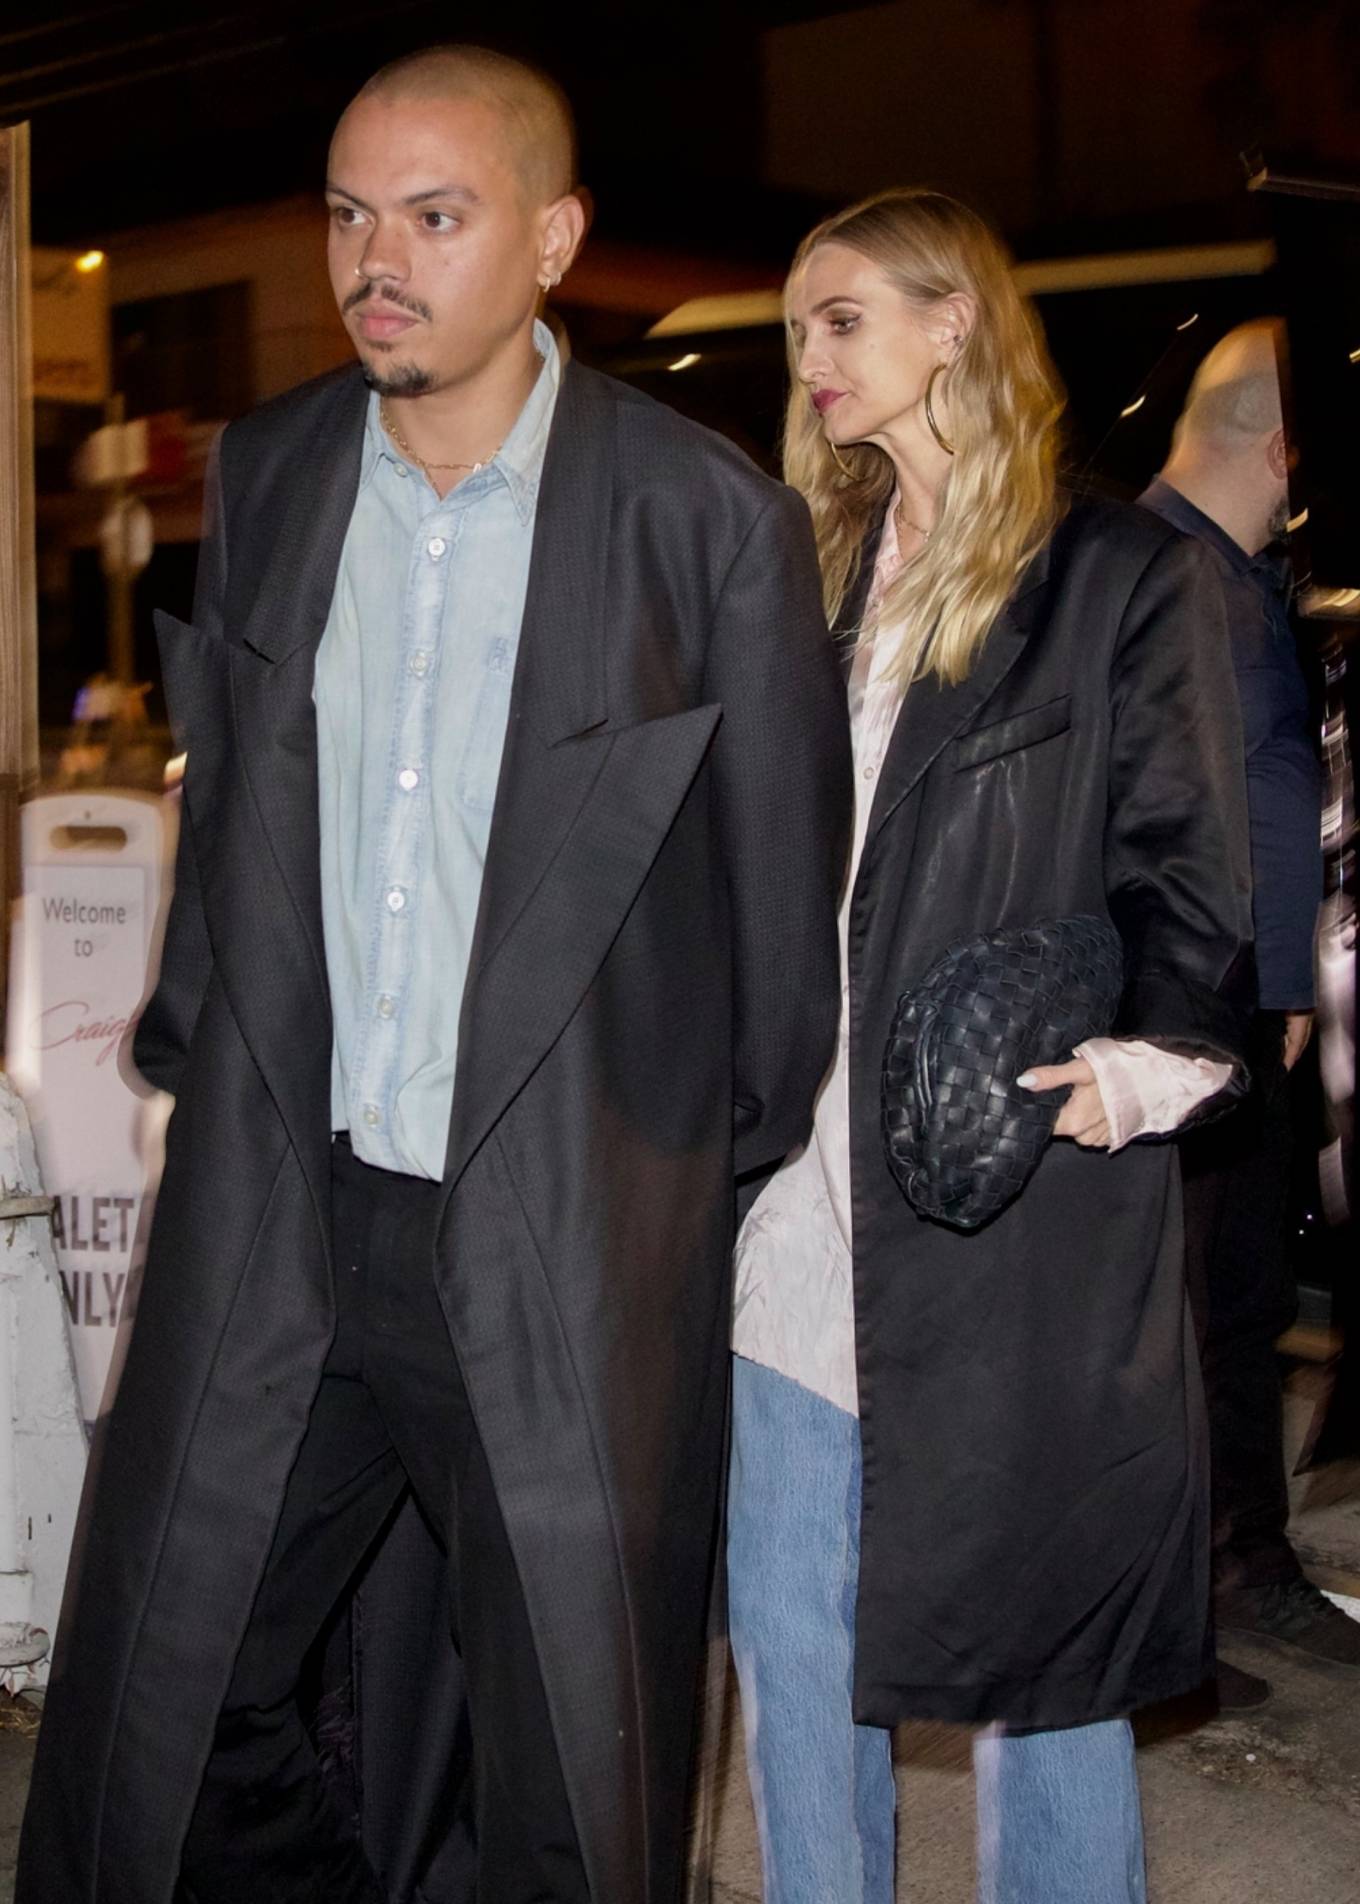 Ashlee Simpson - With Evan Ross head to dinner at Craig's in West Hollywood